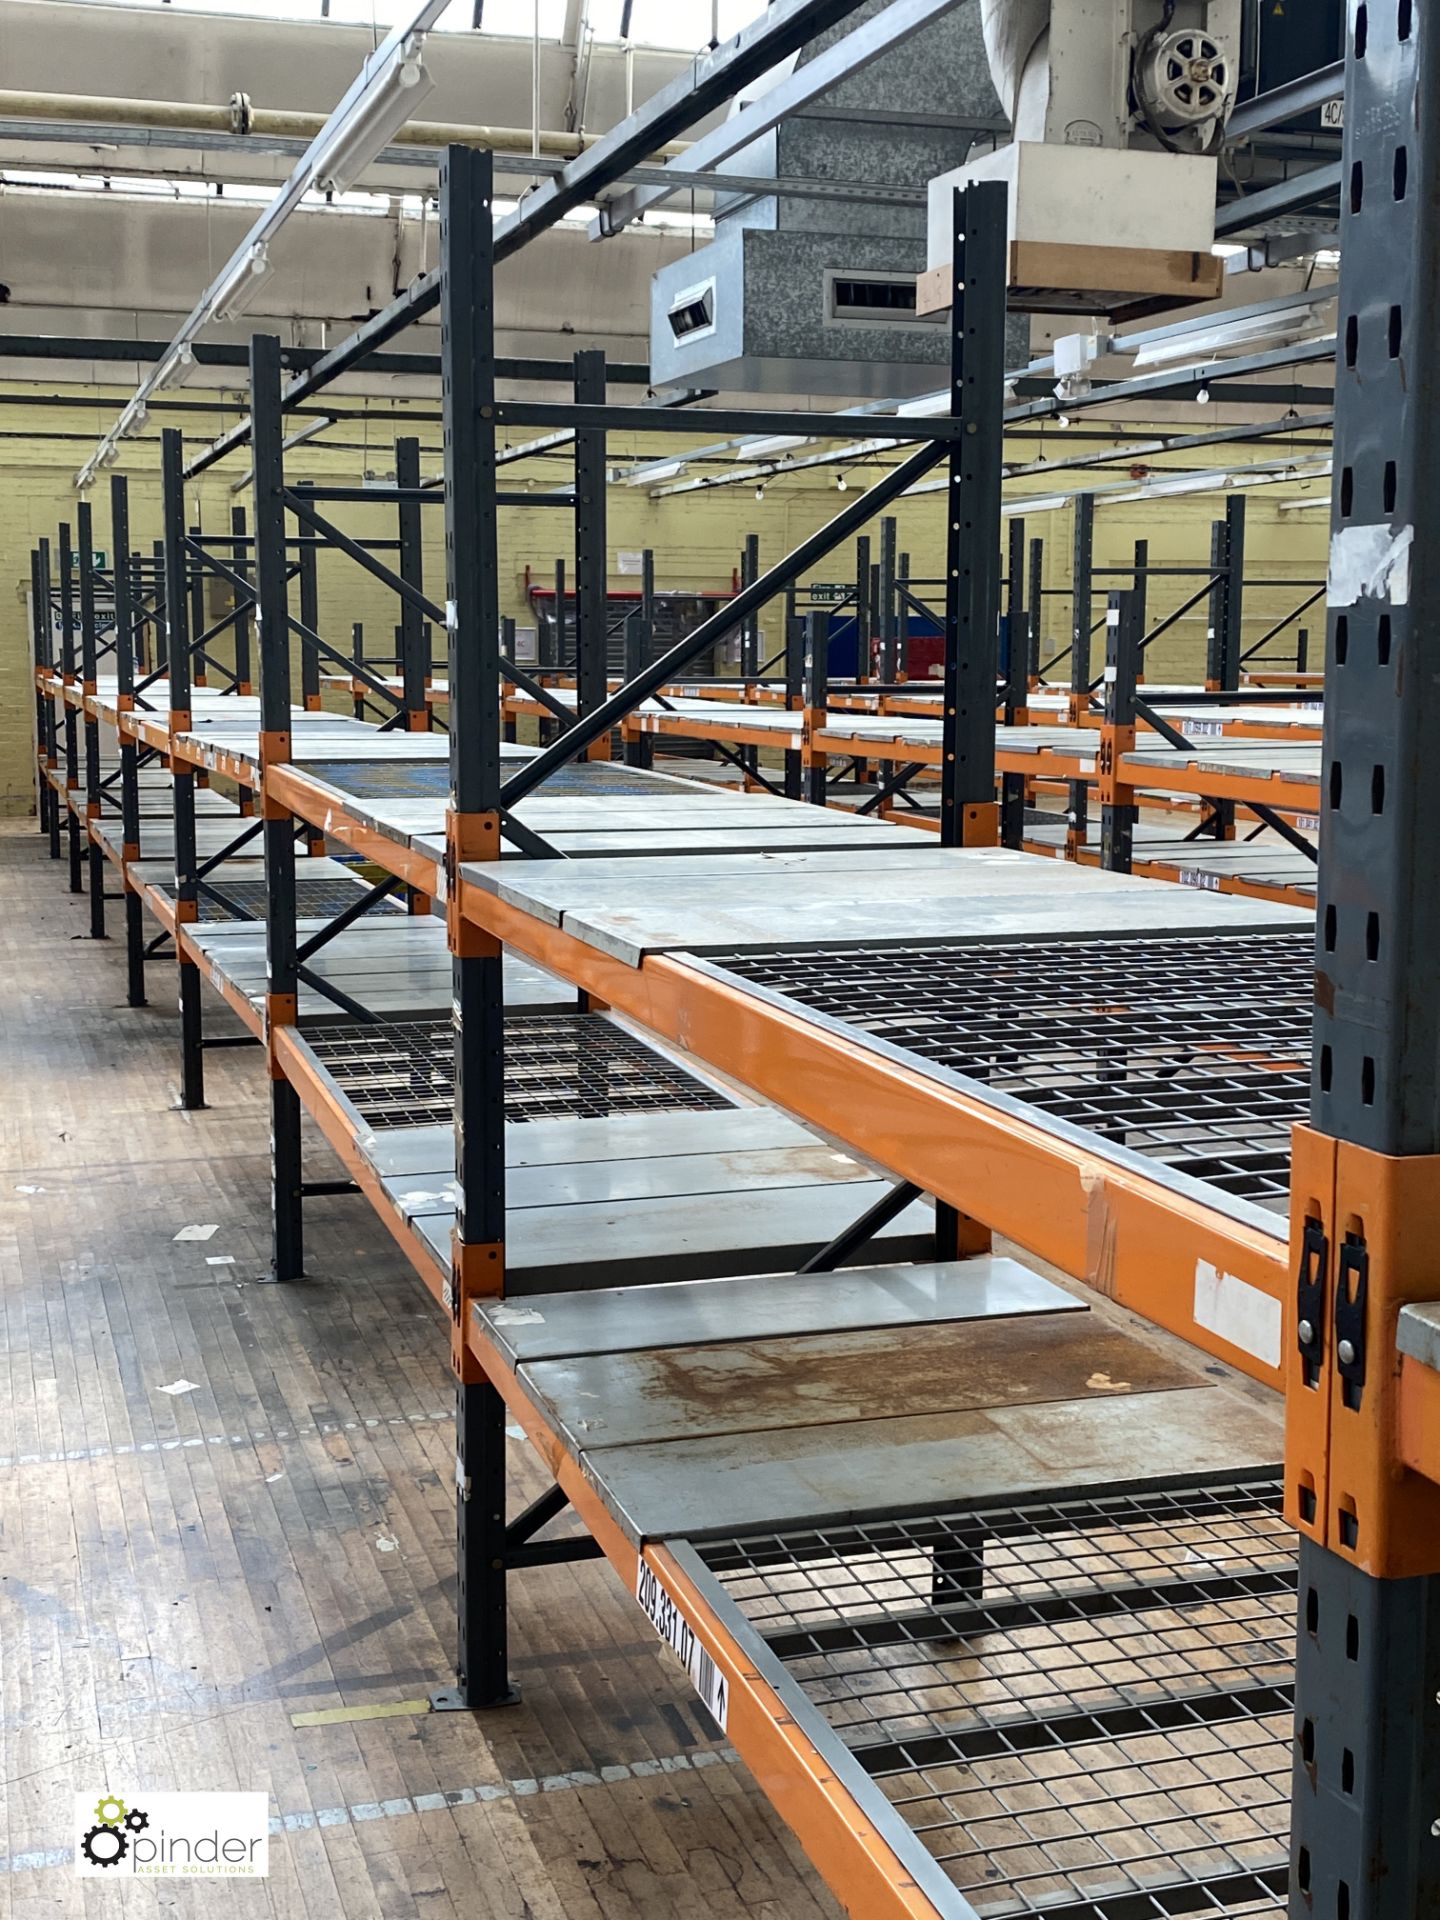 10 bays Dexion Speedlock boltless Racking, comprising 11 uprights 2440mm x 910mm, 40 beams 2450mm, - Image 4 of 4